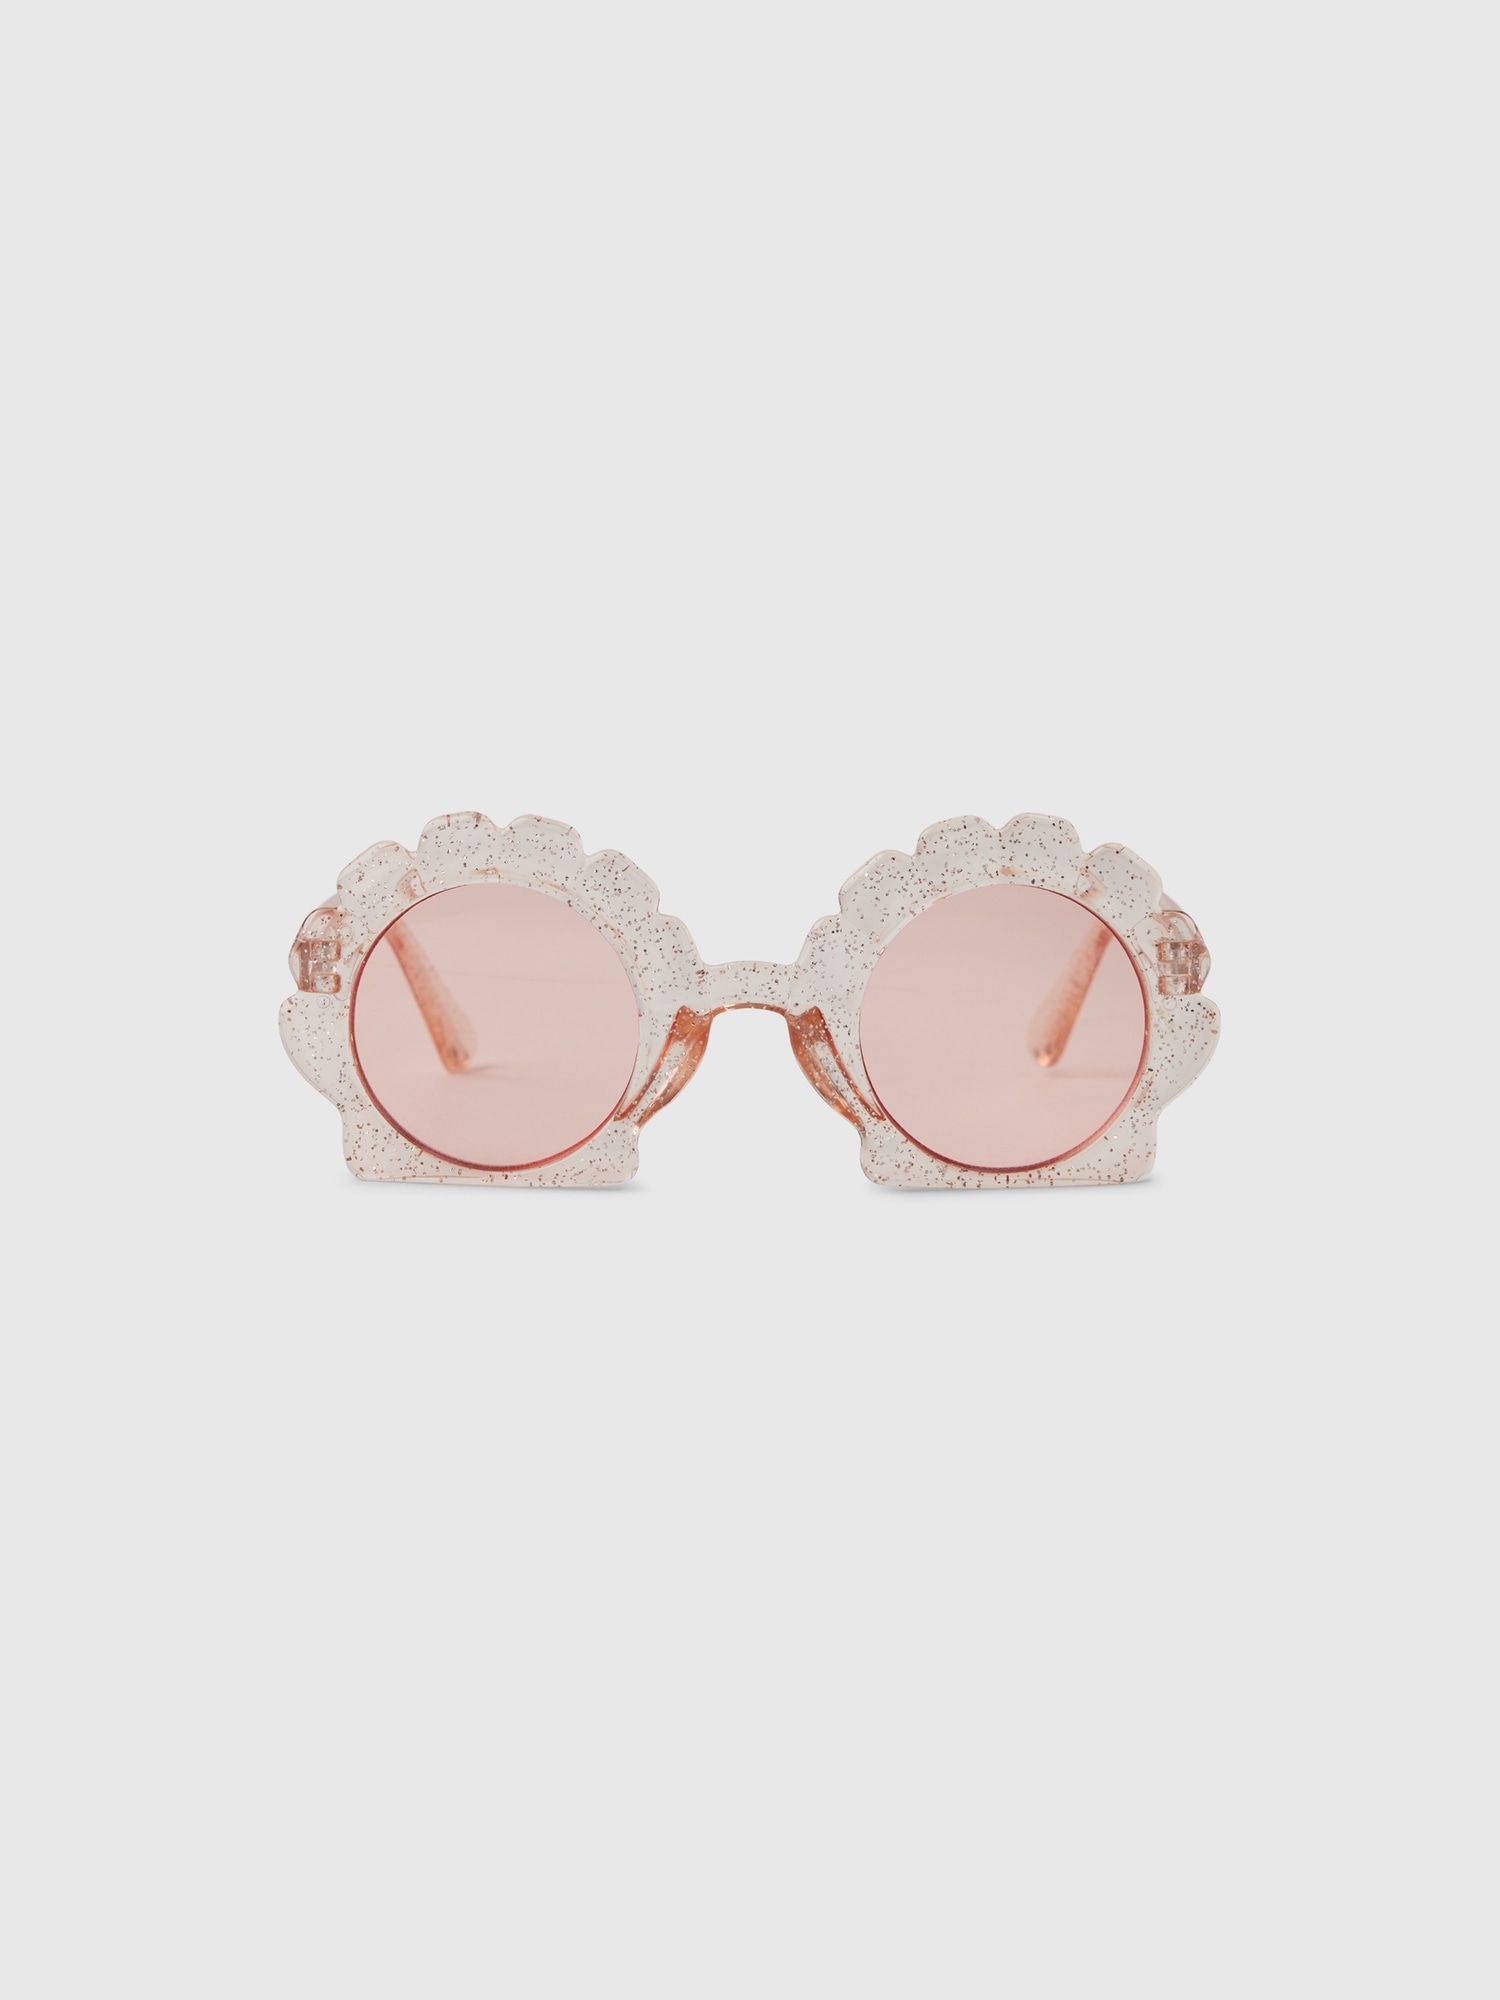 Gap Babies' Toddler Sunglasses In Shell